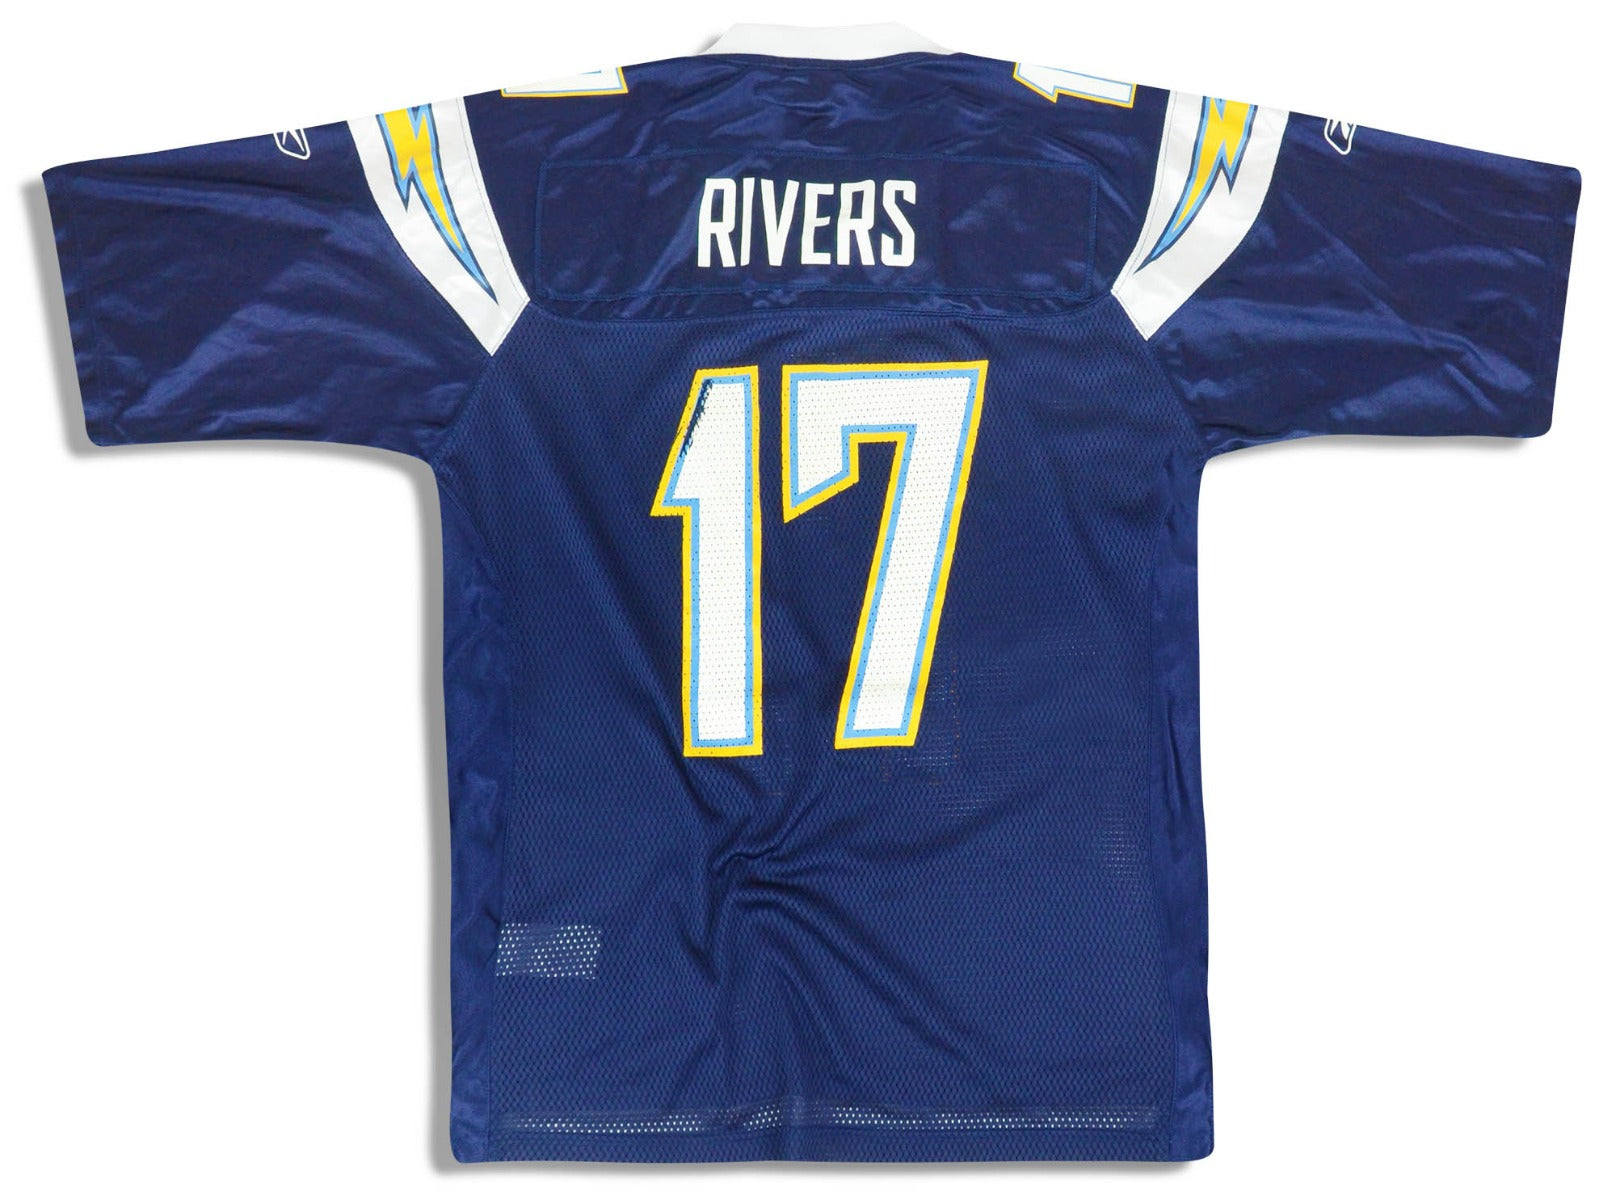 2008-11 SAN DIEGO CHARGERS RIVERS #17 REEBOK ON FIELD JERSEY (HOME) M